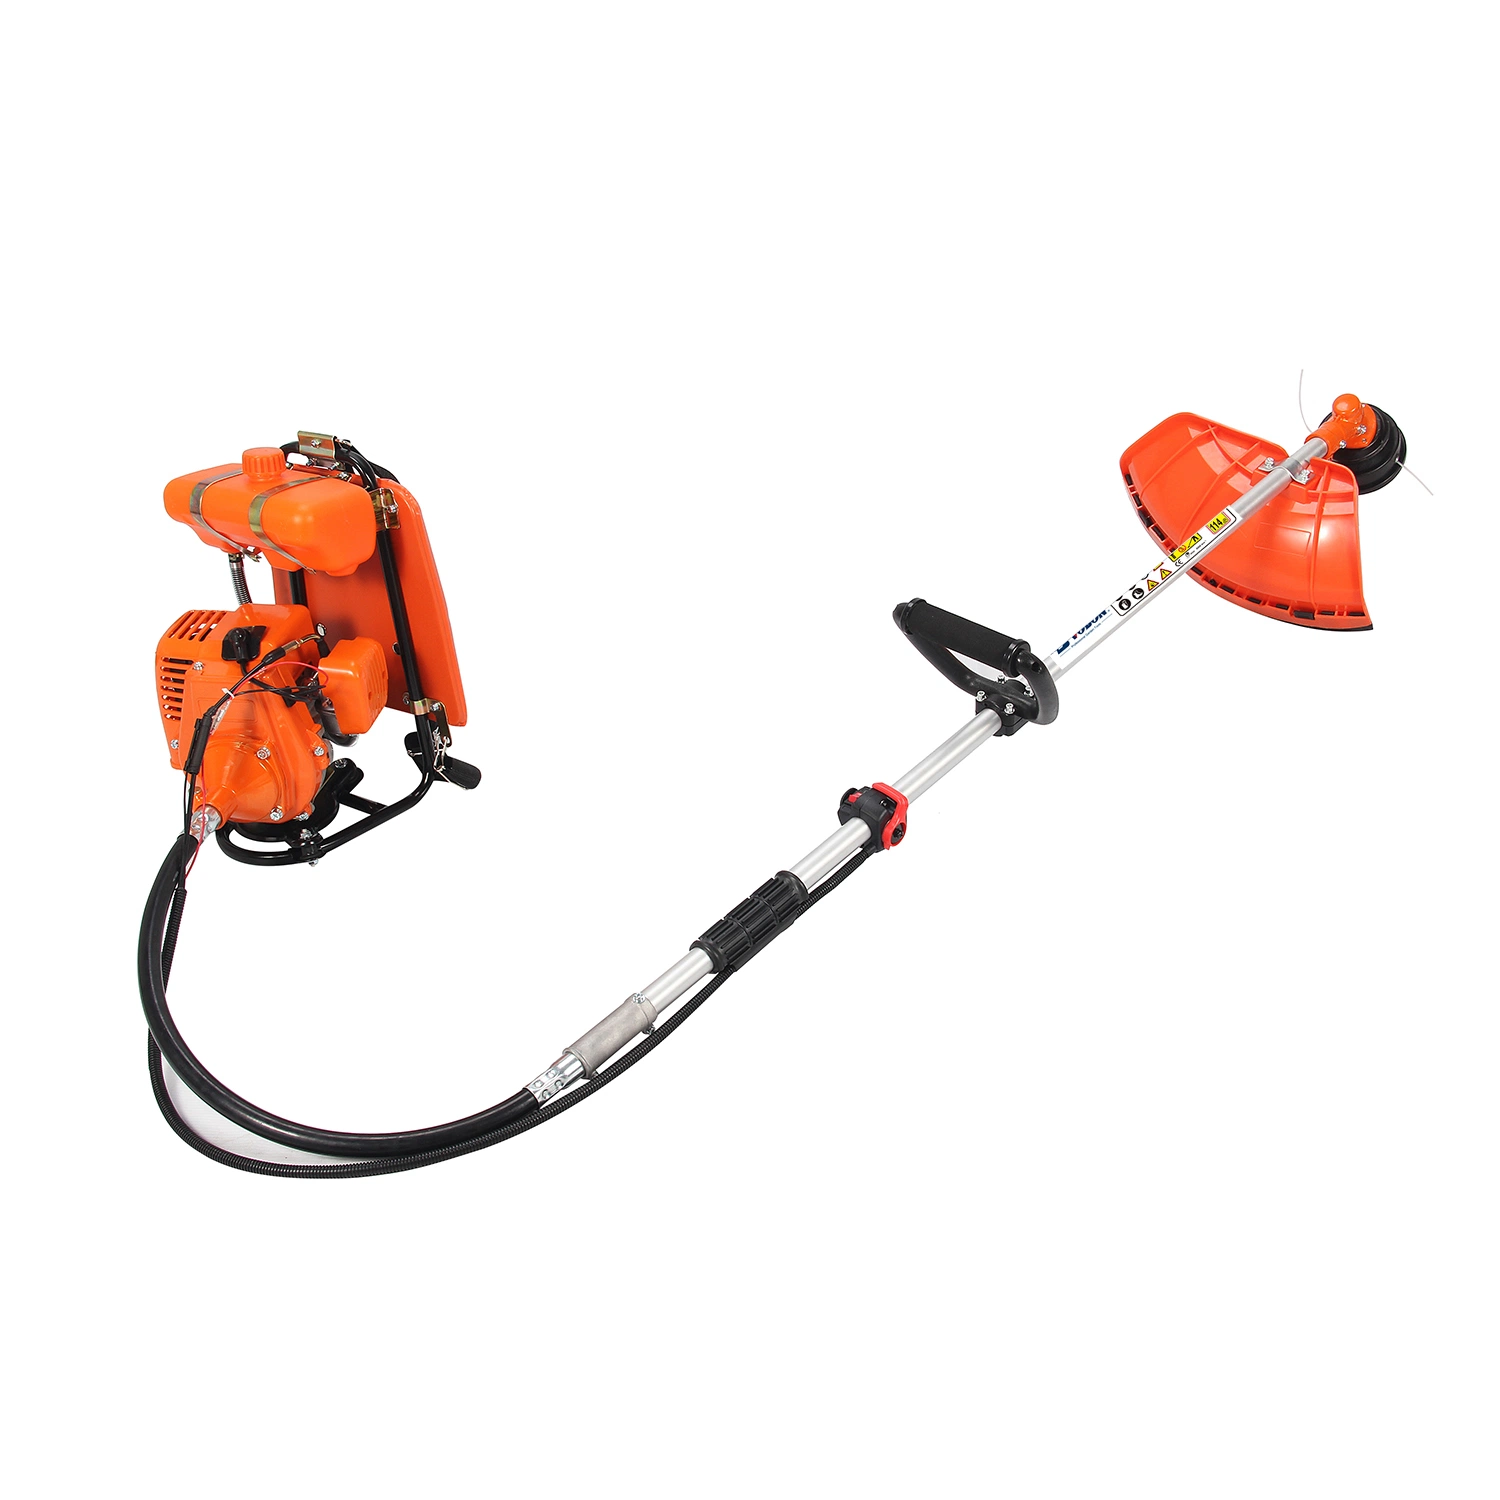 2021 Hot Selling High quality/High cost performance 2 Stroke 42.7cc Gasoline Petrol Brush Cutter with CE, GS and Euv Certificate Brush Cutter Agricultural Harvest Multi Function